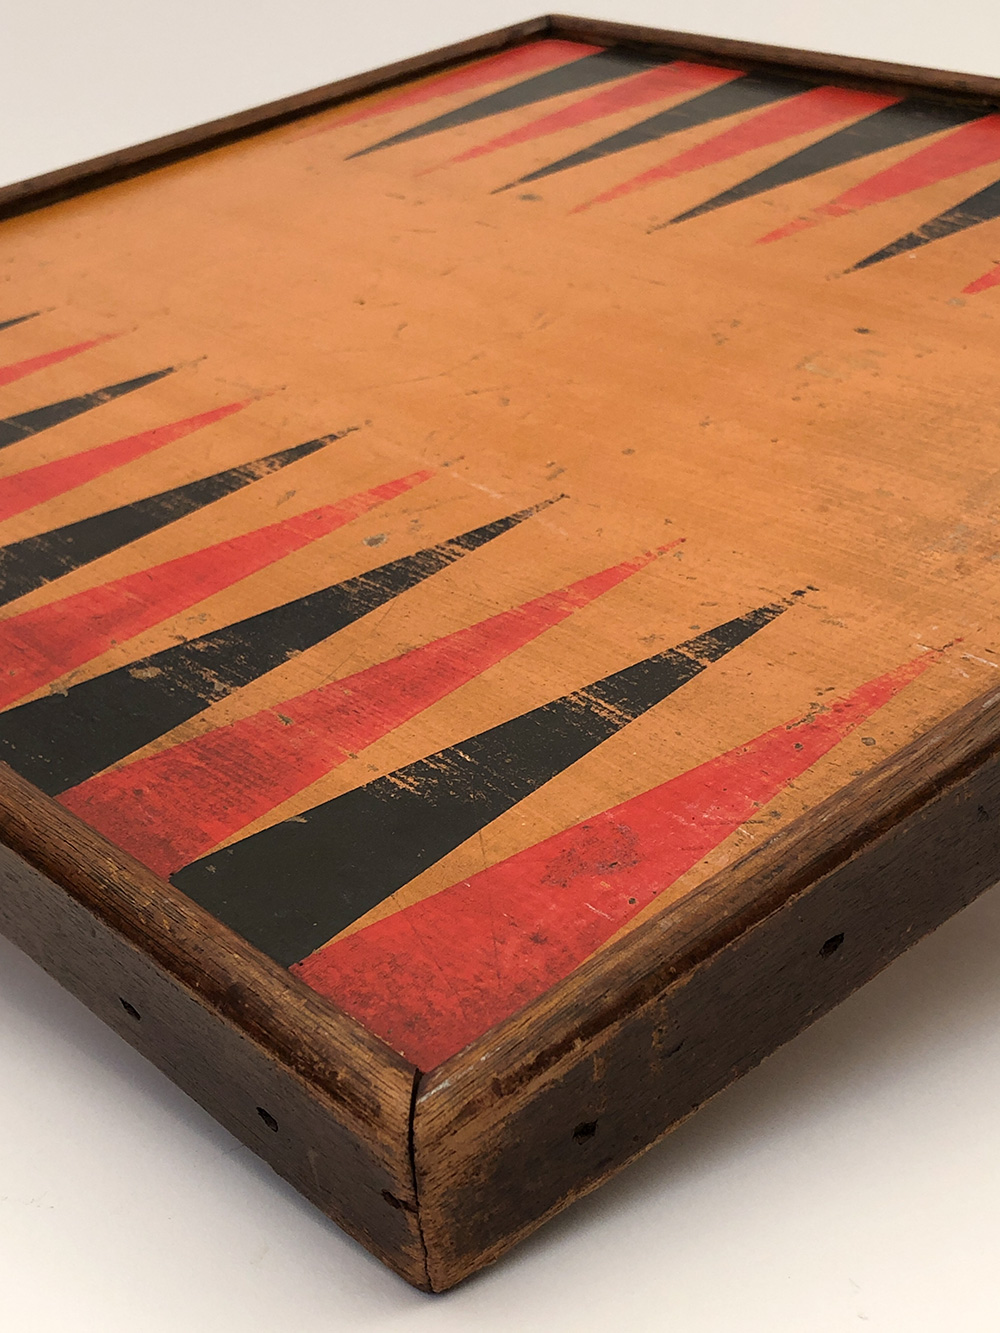 19th century paint decorated wooden checkers gameboard